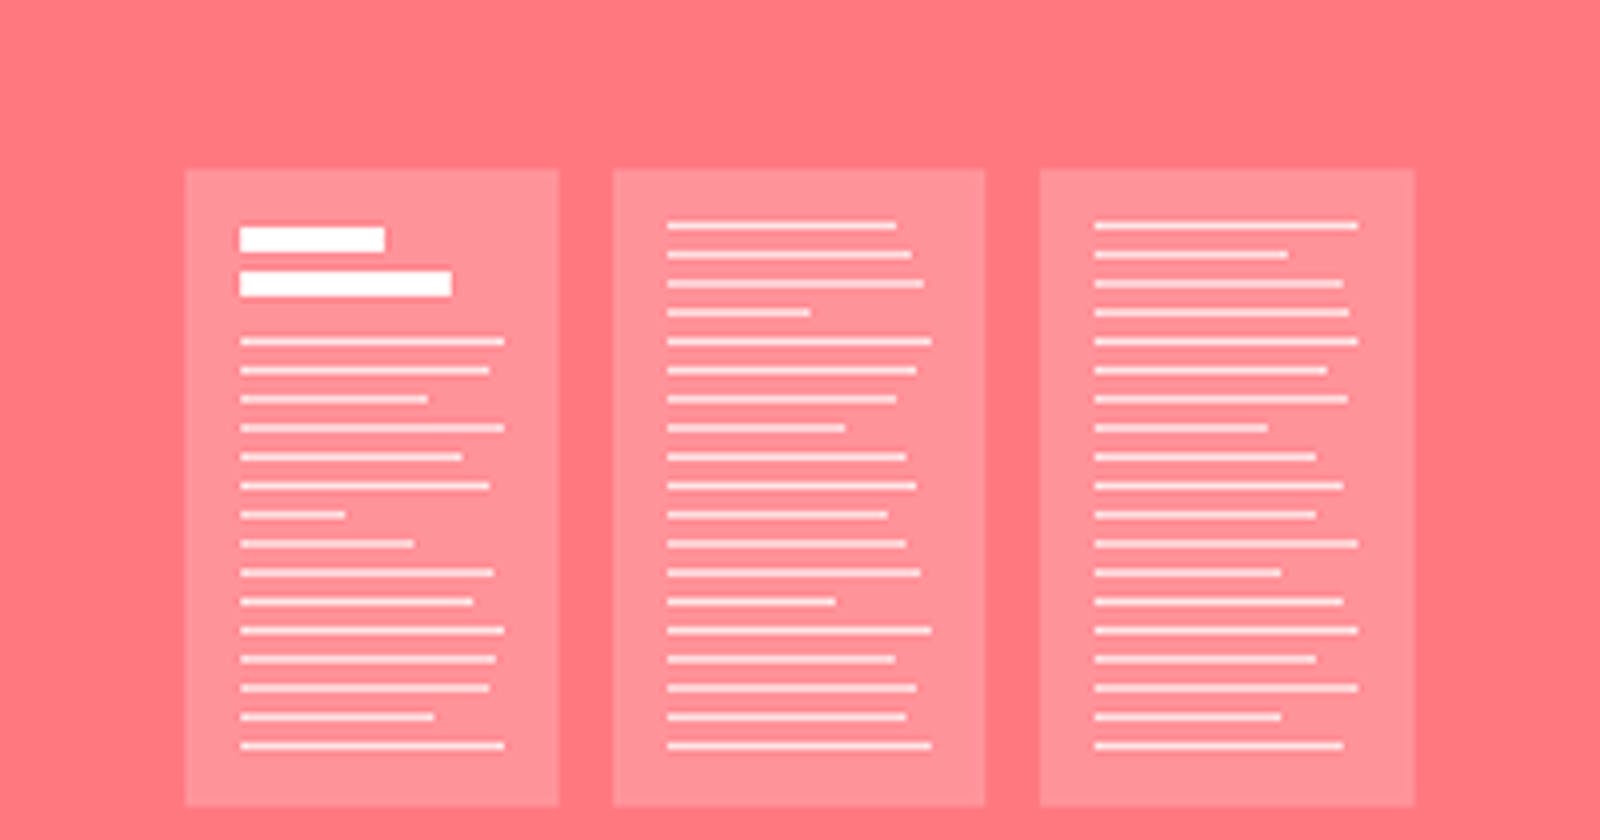 How to make Columns of Webpage Content using HTML5 & CSS3